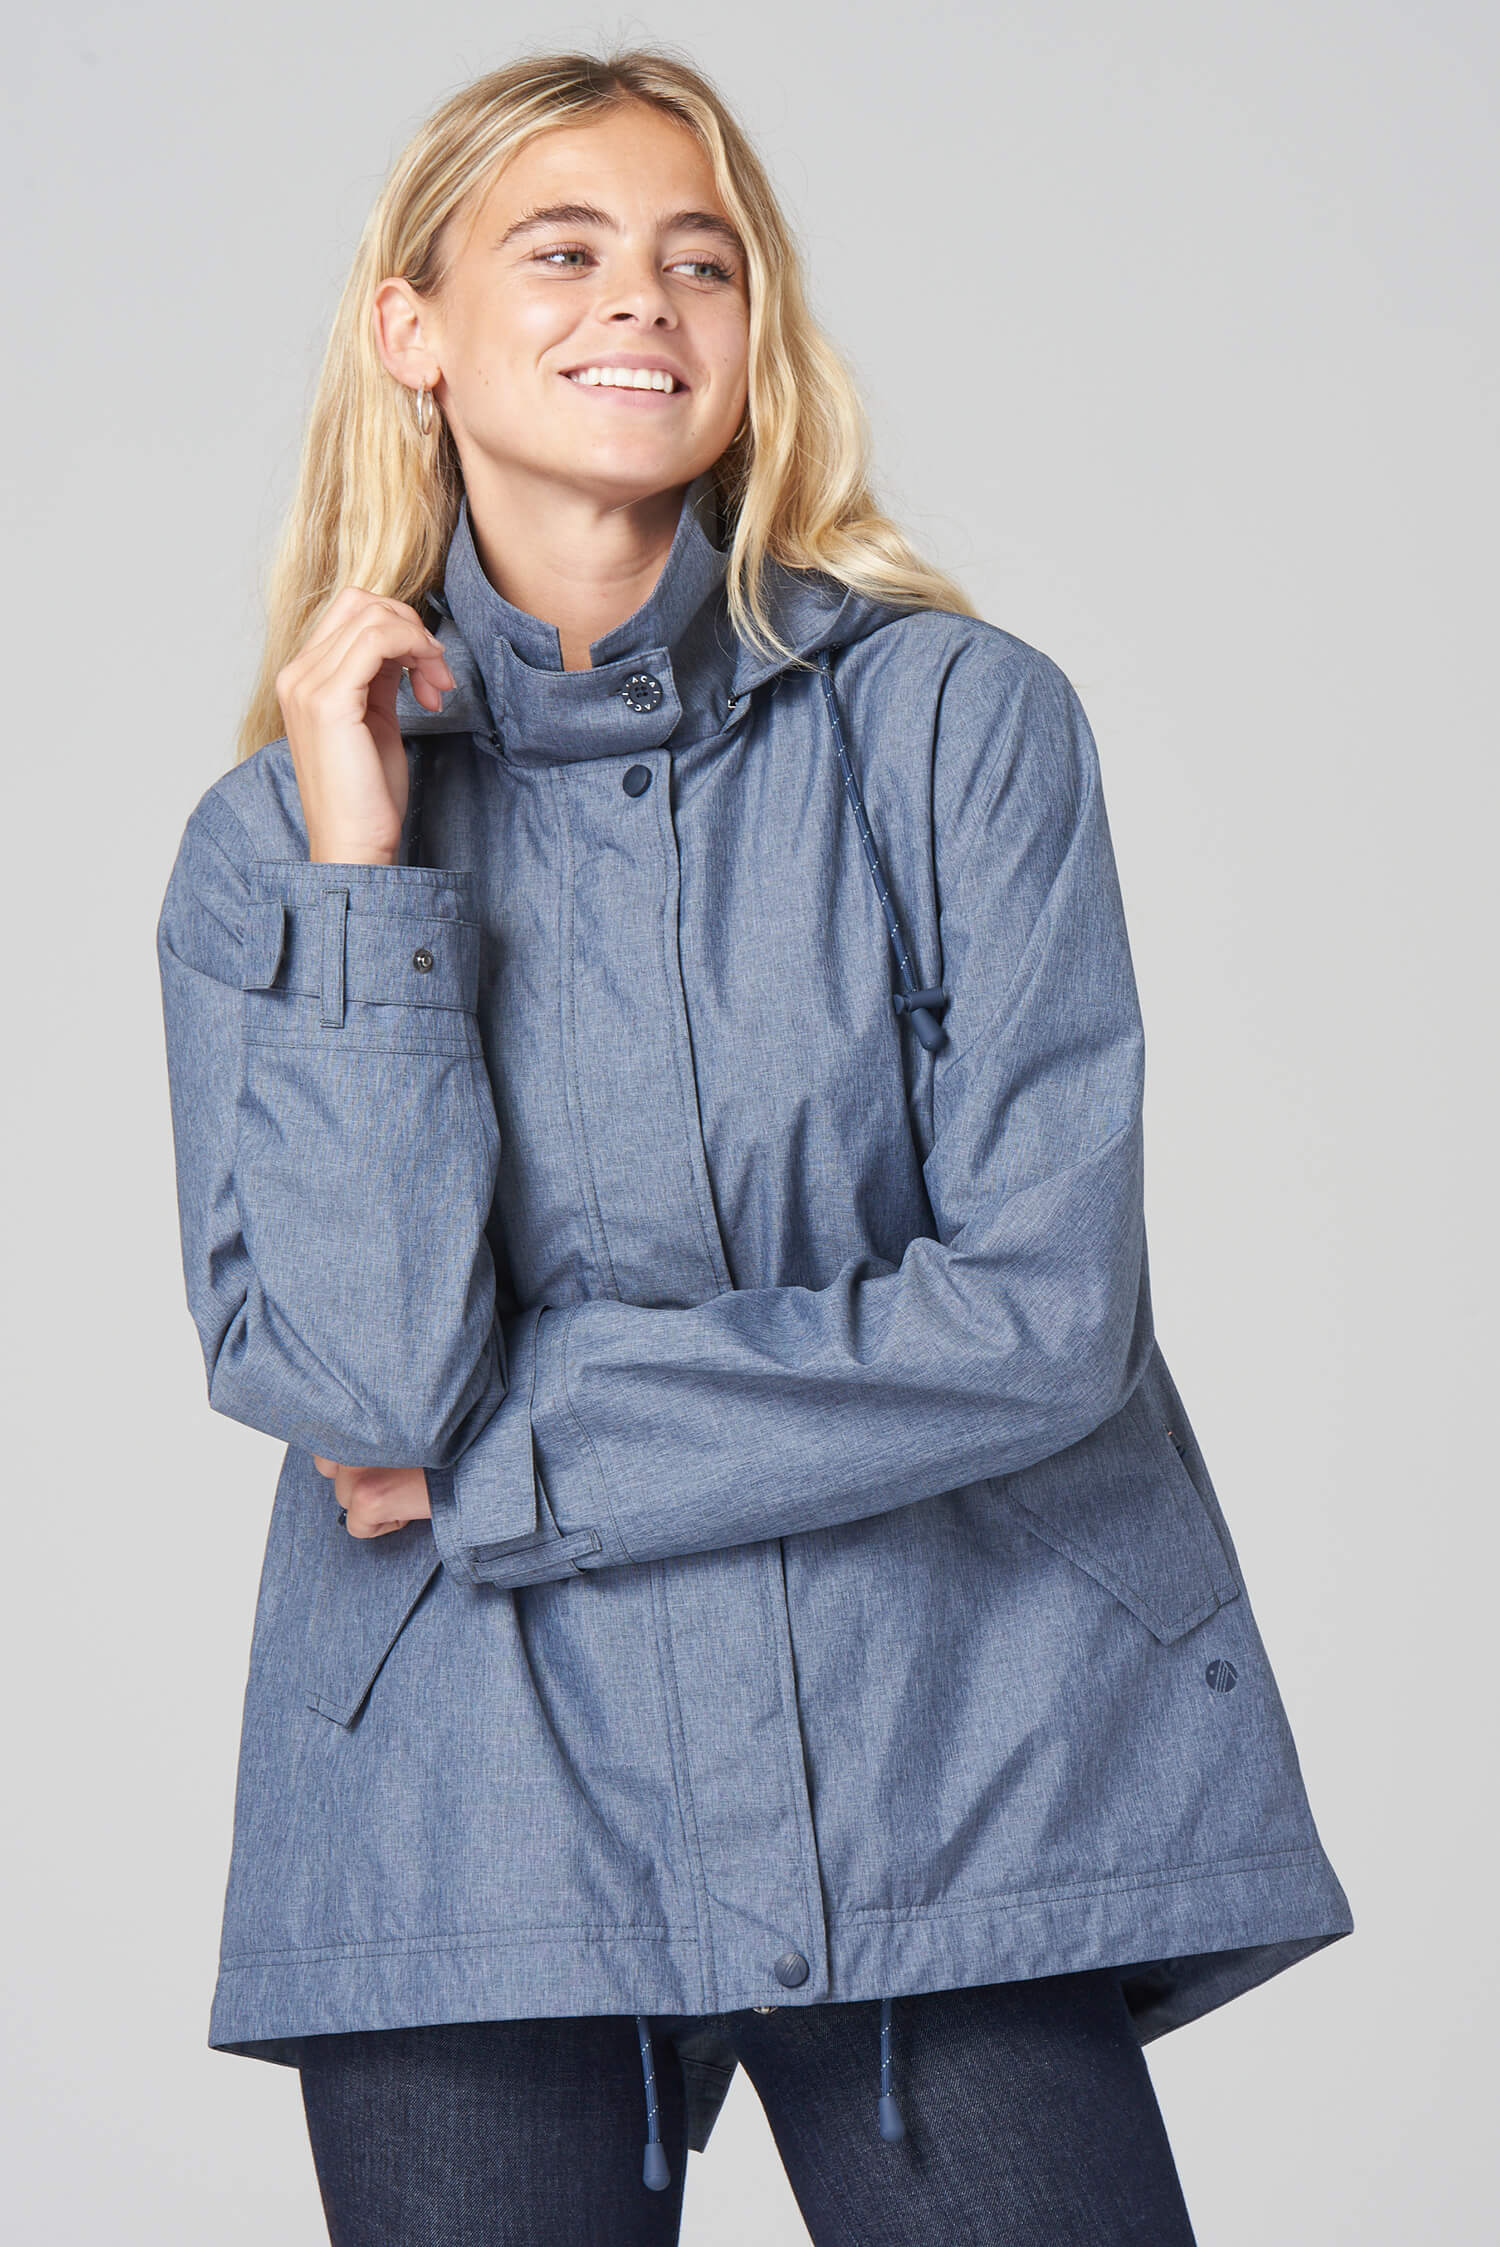 We're so excited to launch the Waterproof Multiway Jacket. It has